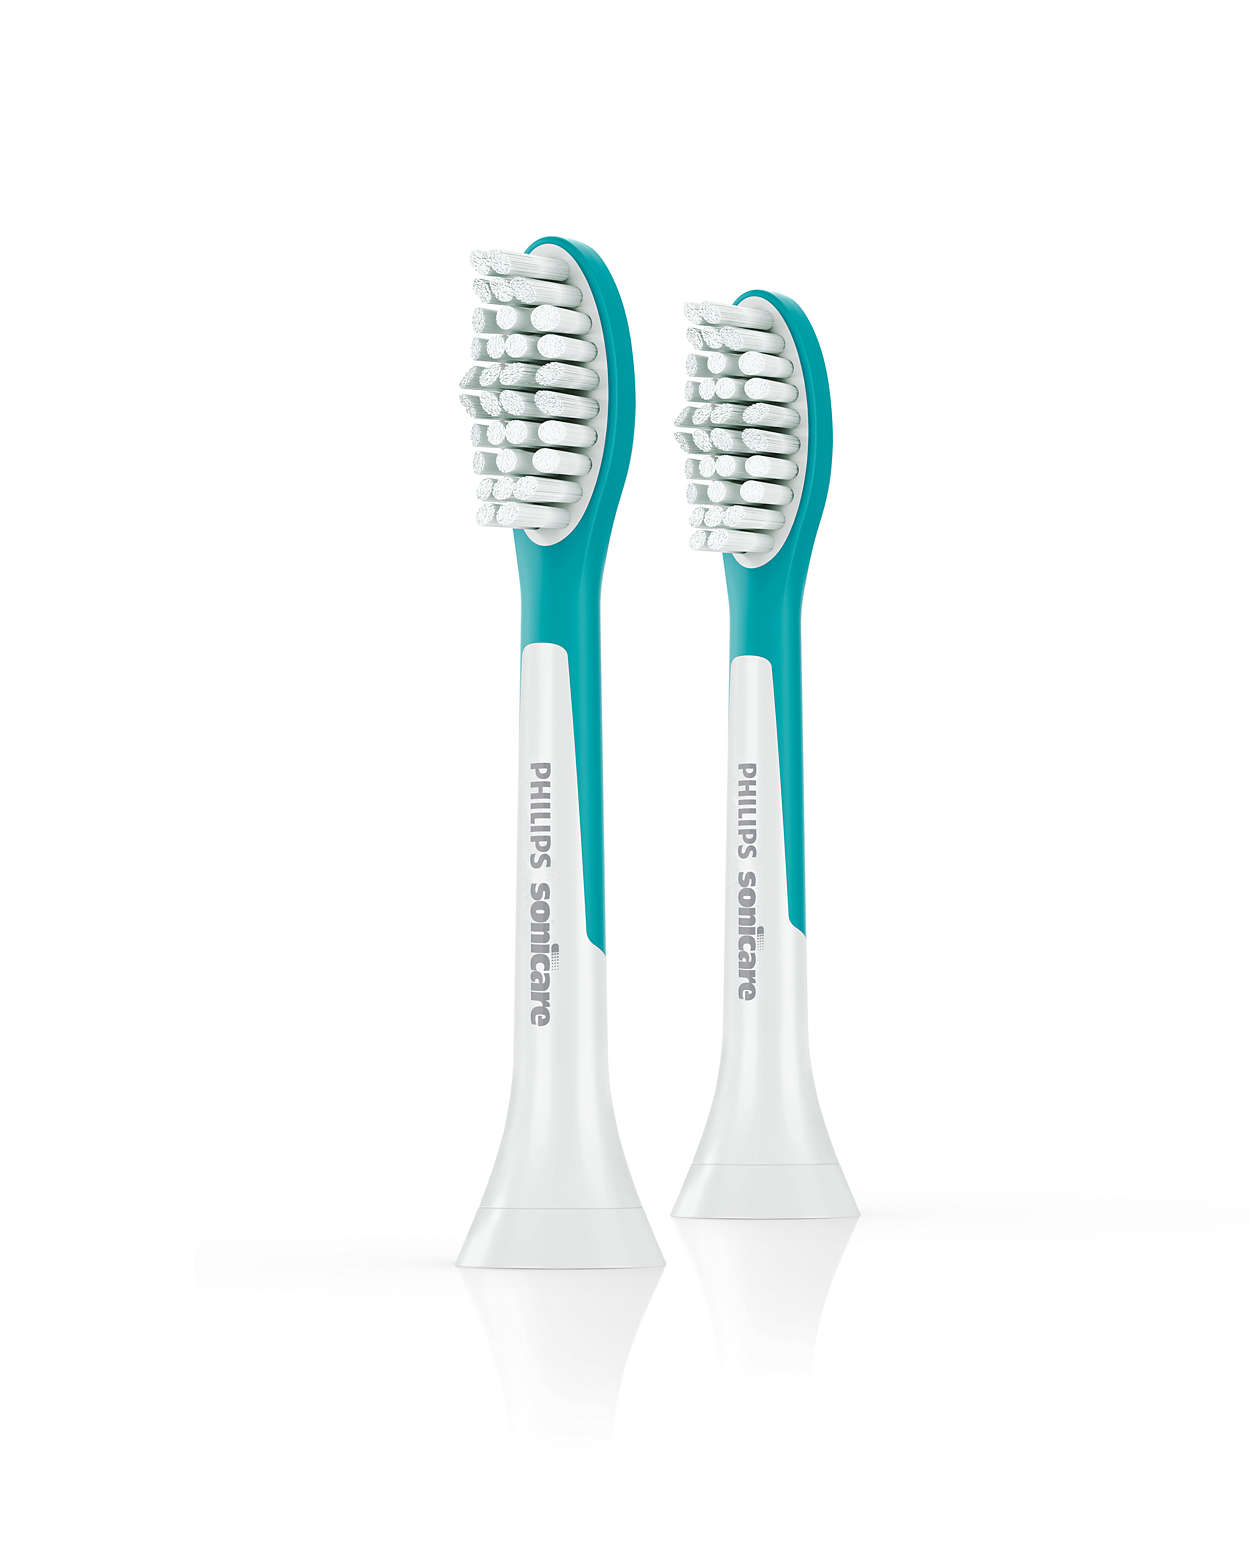 sonicare toothbrush heads costco